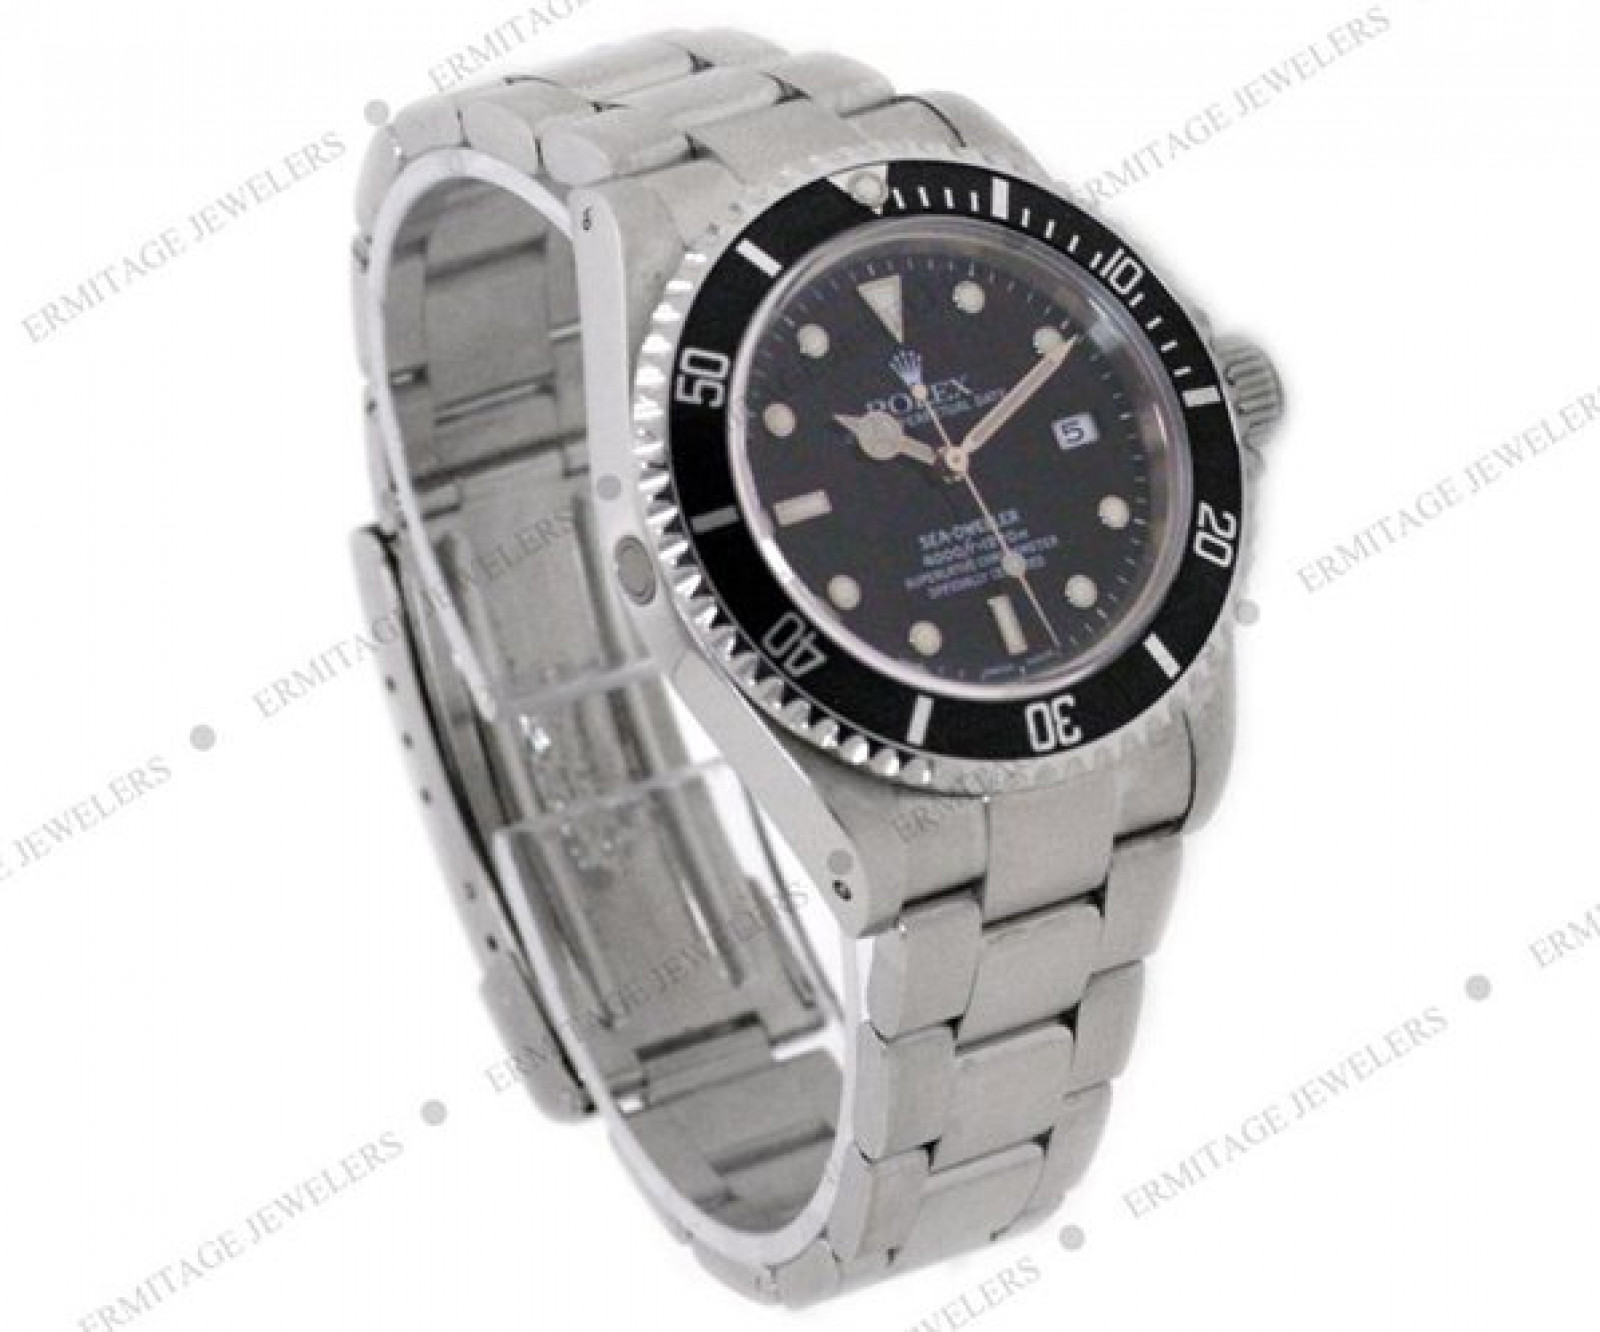 Pre-Owned Rolex Oyster Perpetual Sea-Dweller 16600 Steel Year 2004